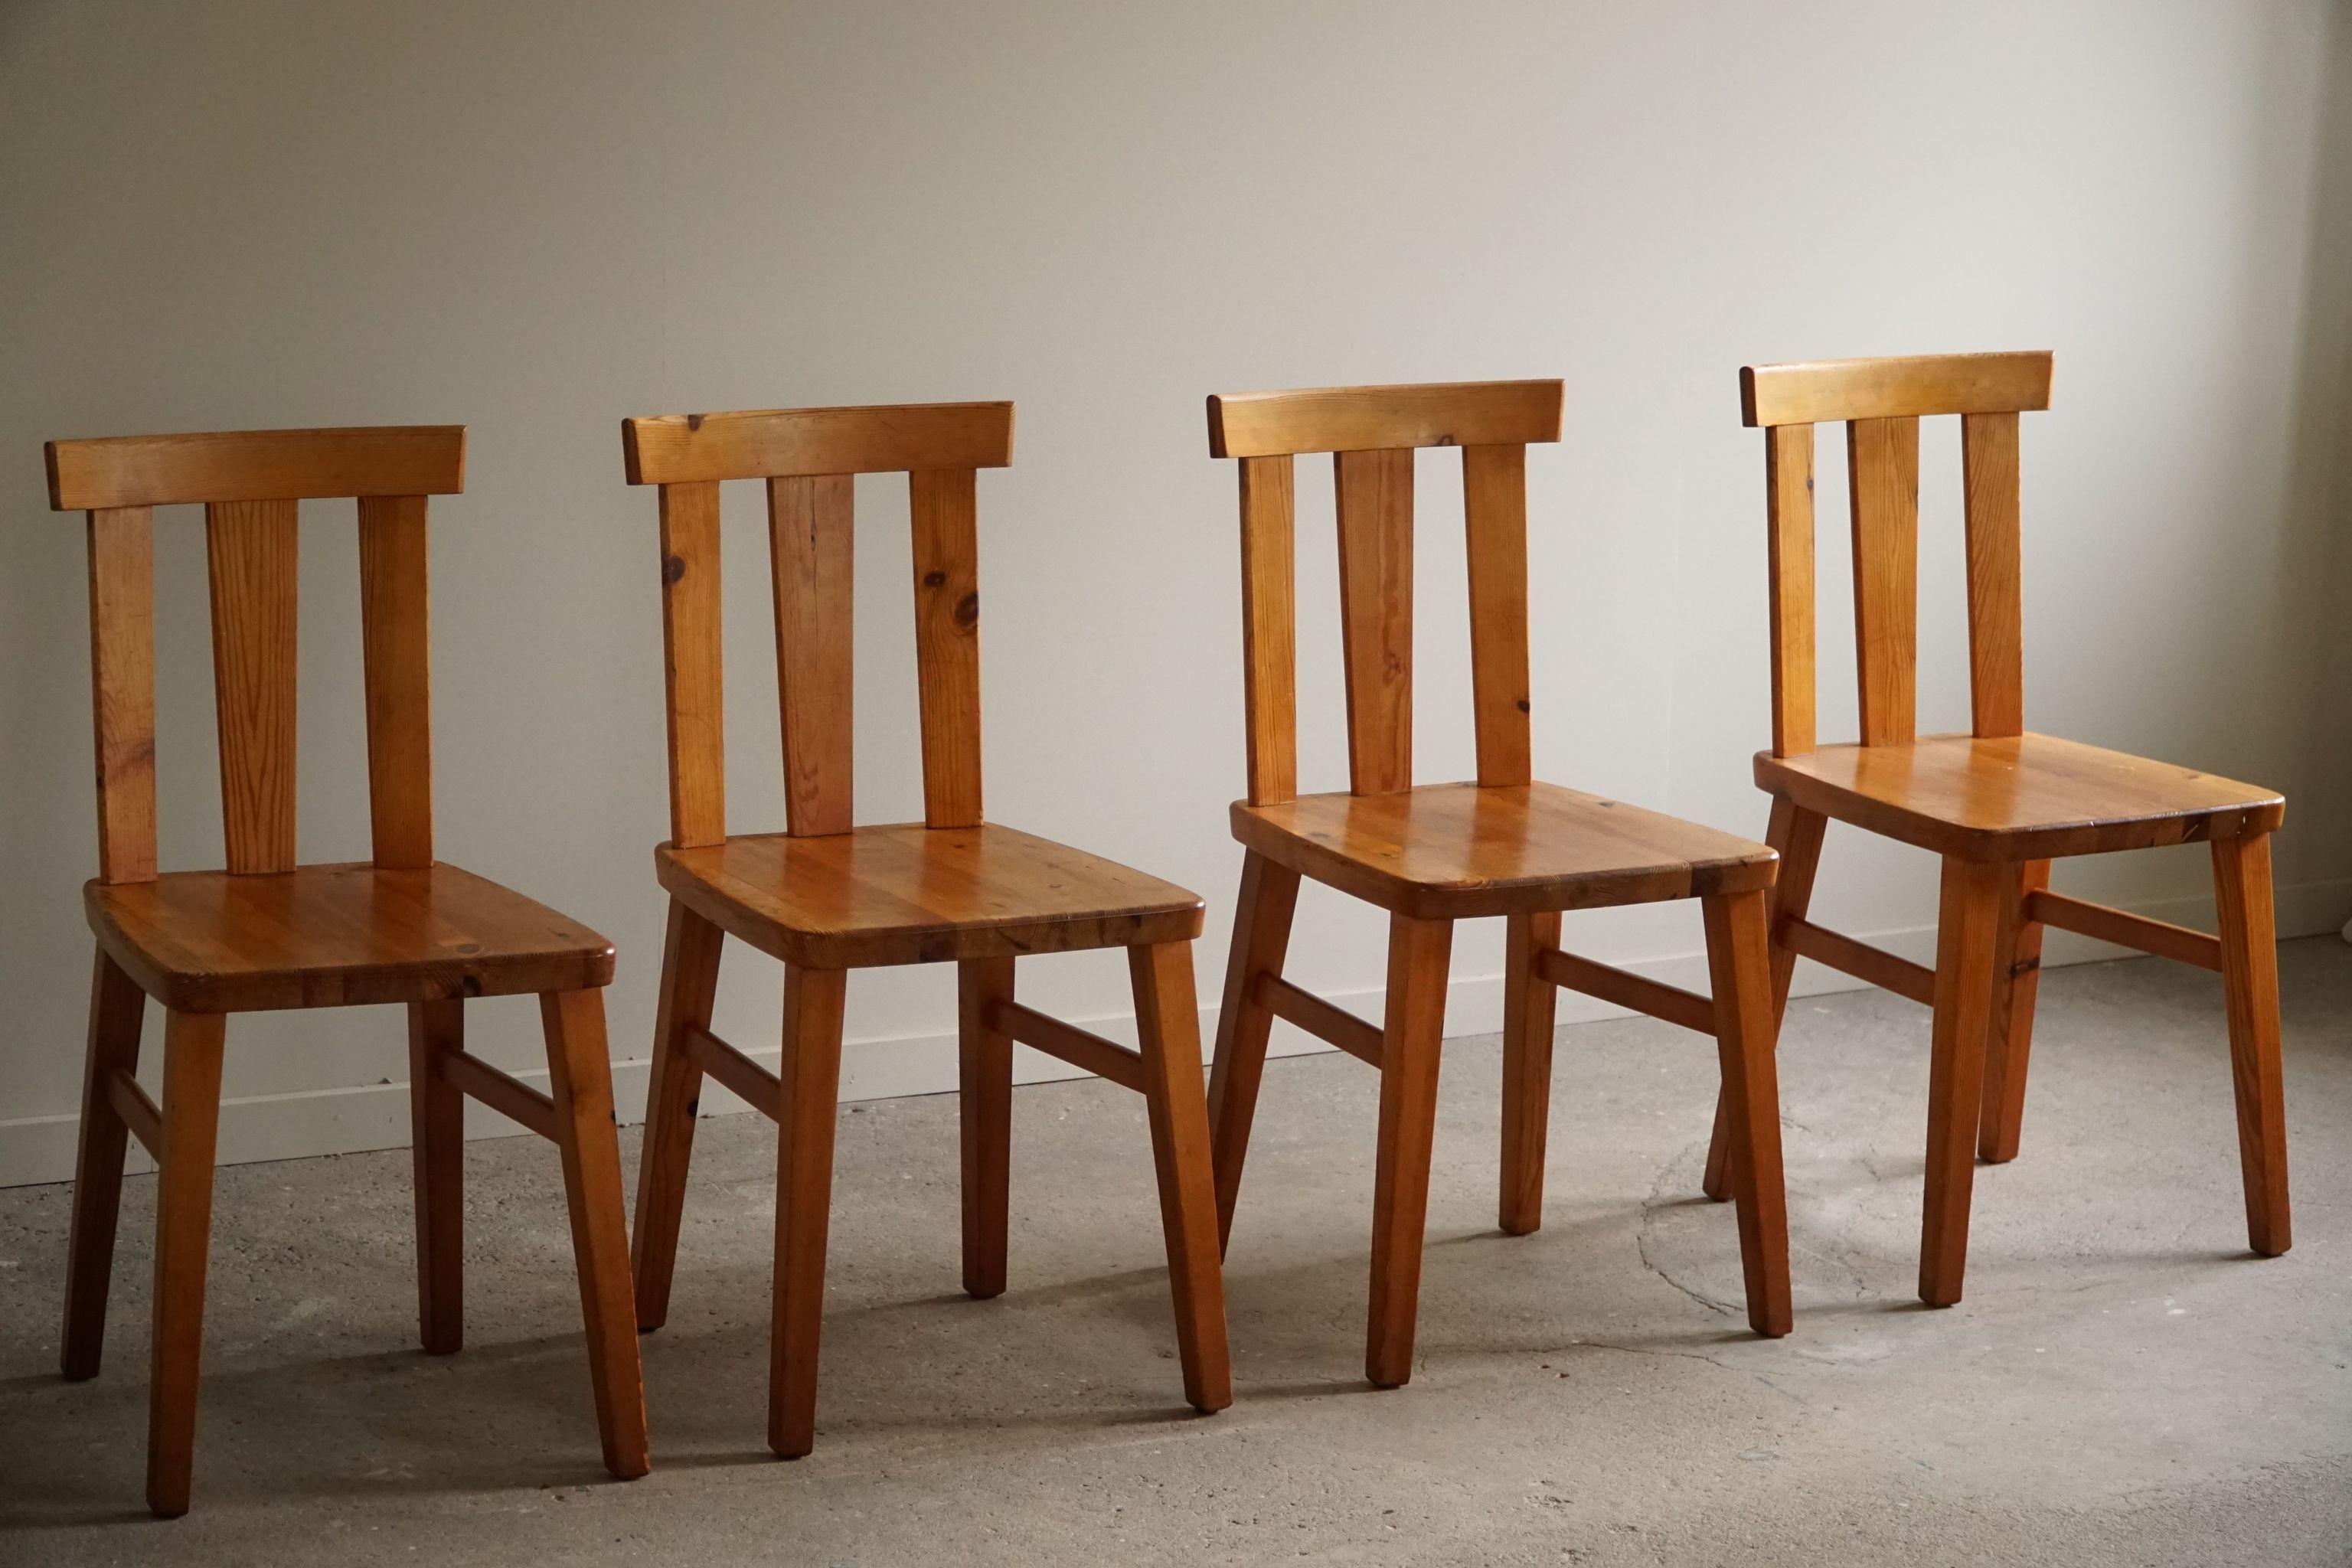 Swedish Modern, Set of 4 Chairs in Solid Pine, Axel Einar Hjorth Style, 1950s For Sale 13